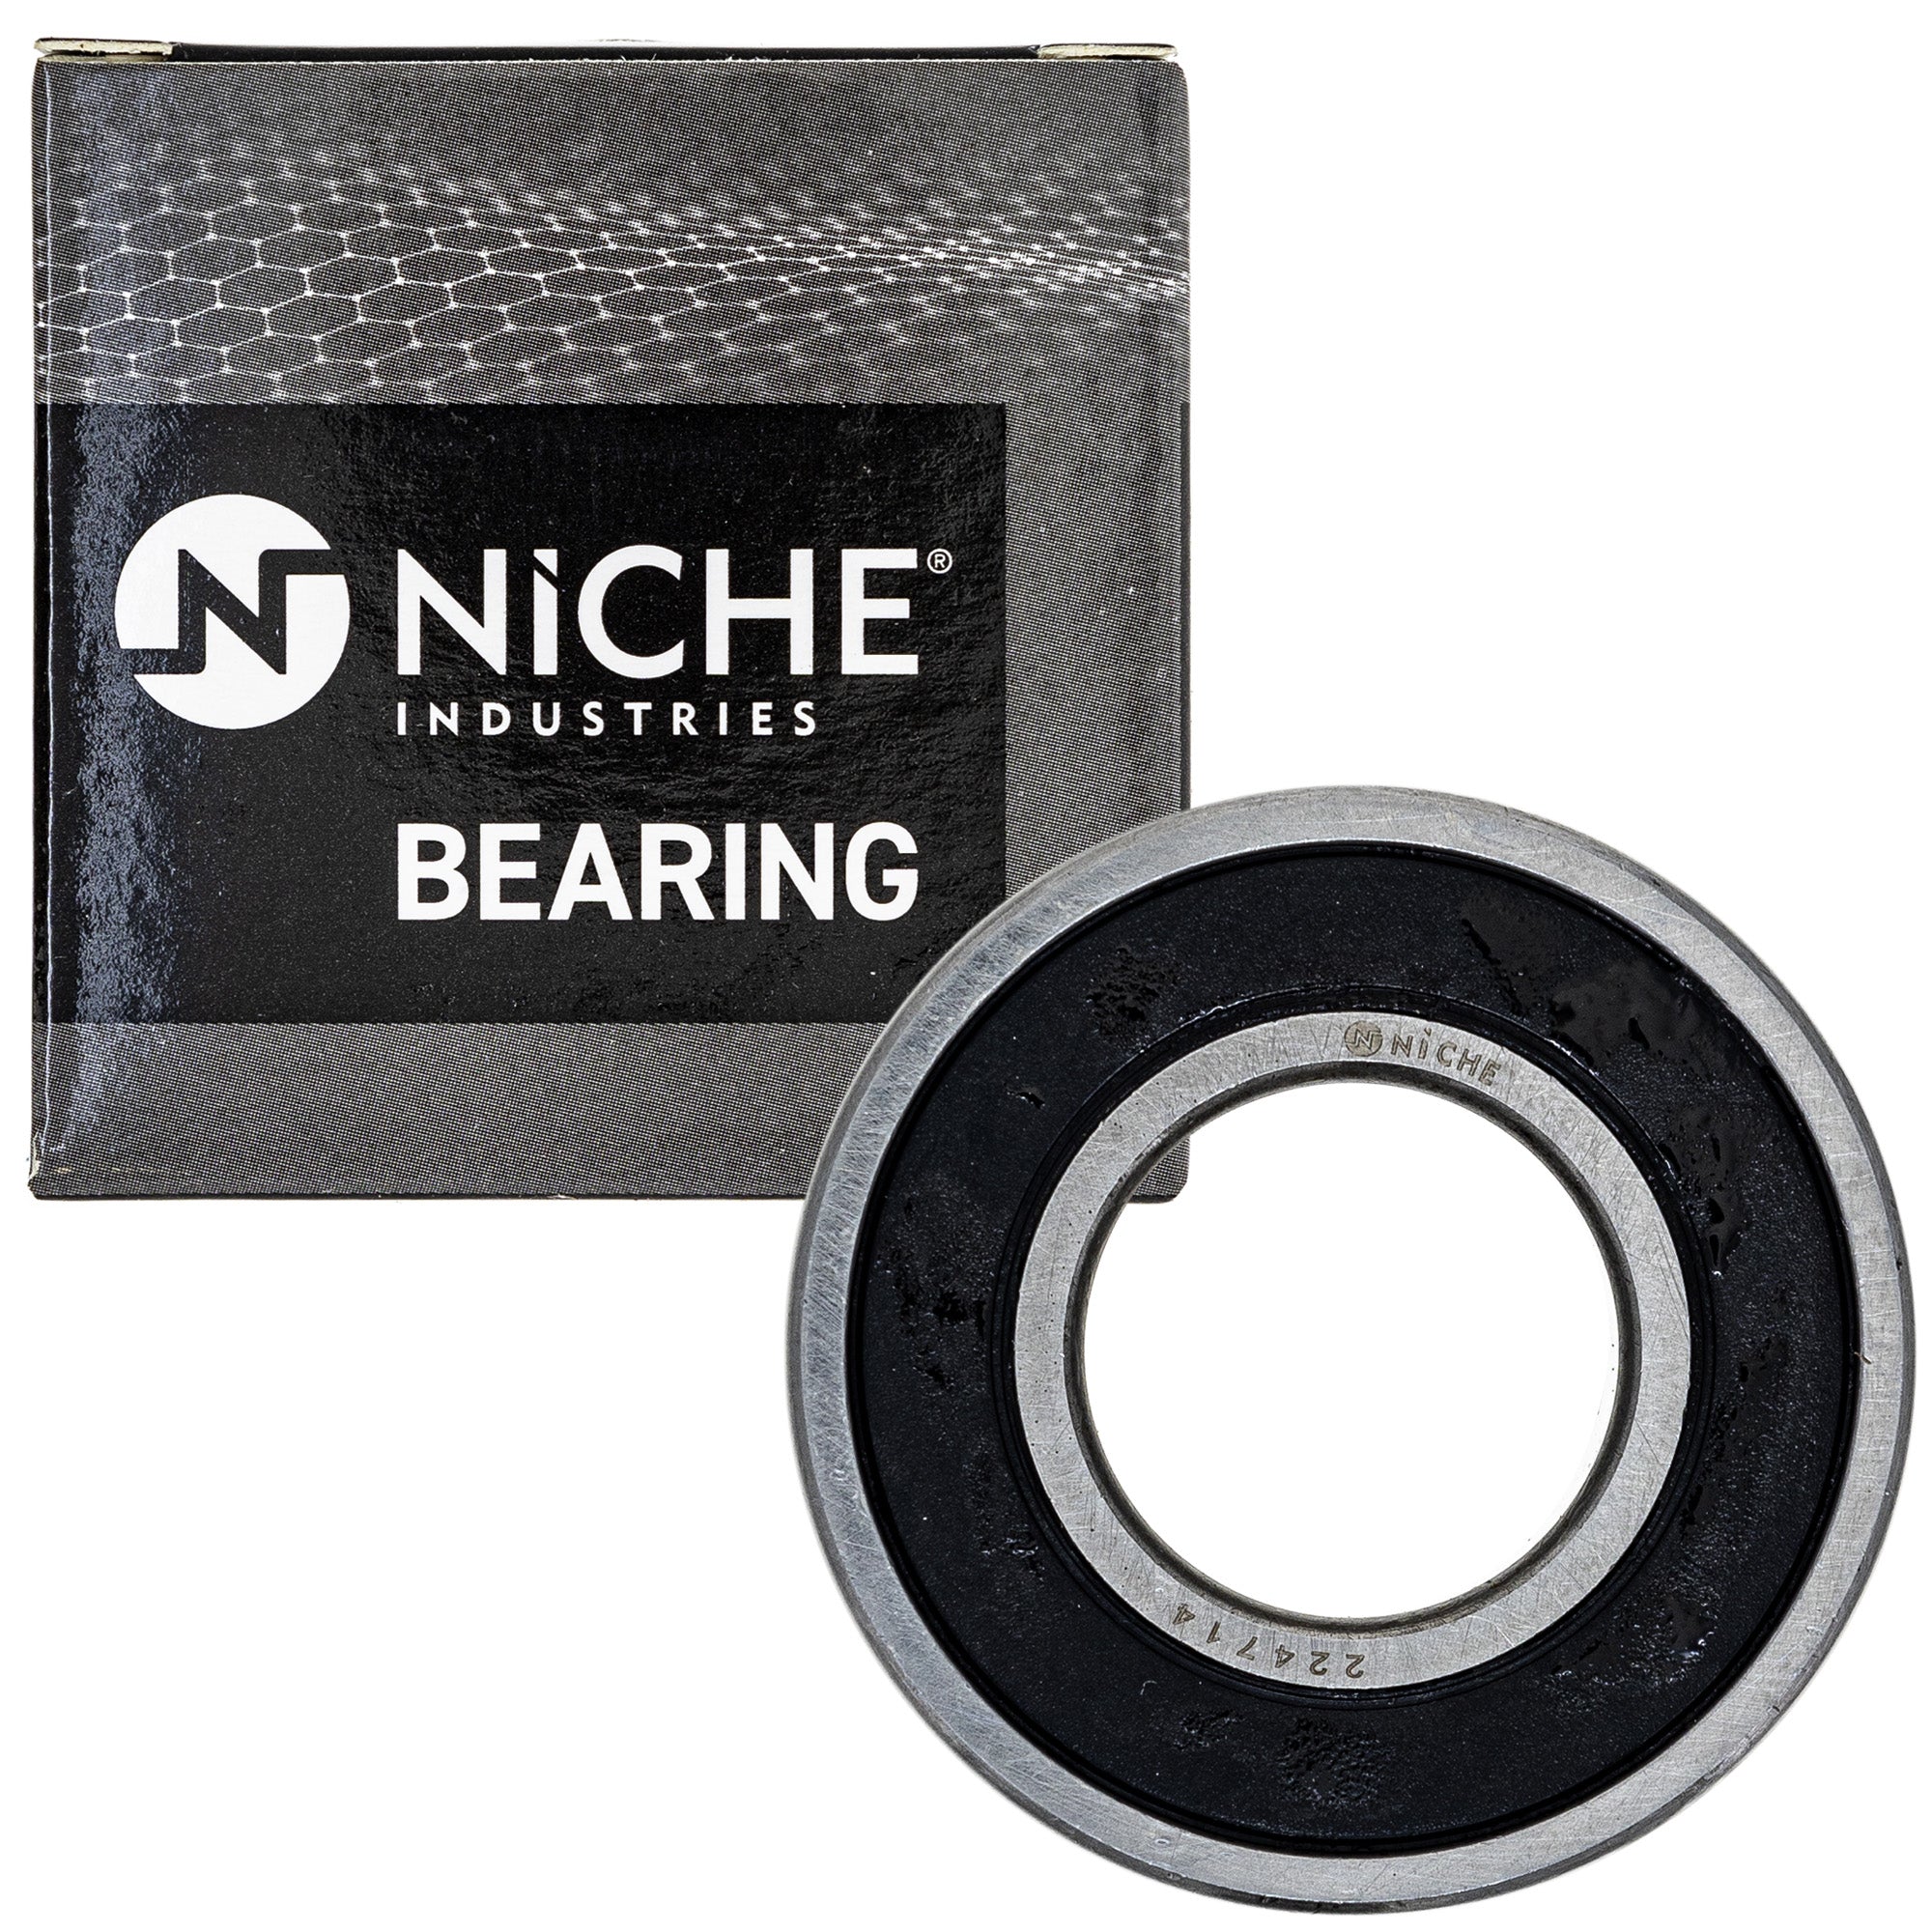 NICHE MK1009199 Wheel Bearing Seal Kit for zOTHER RC51 CBR600RR